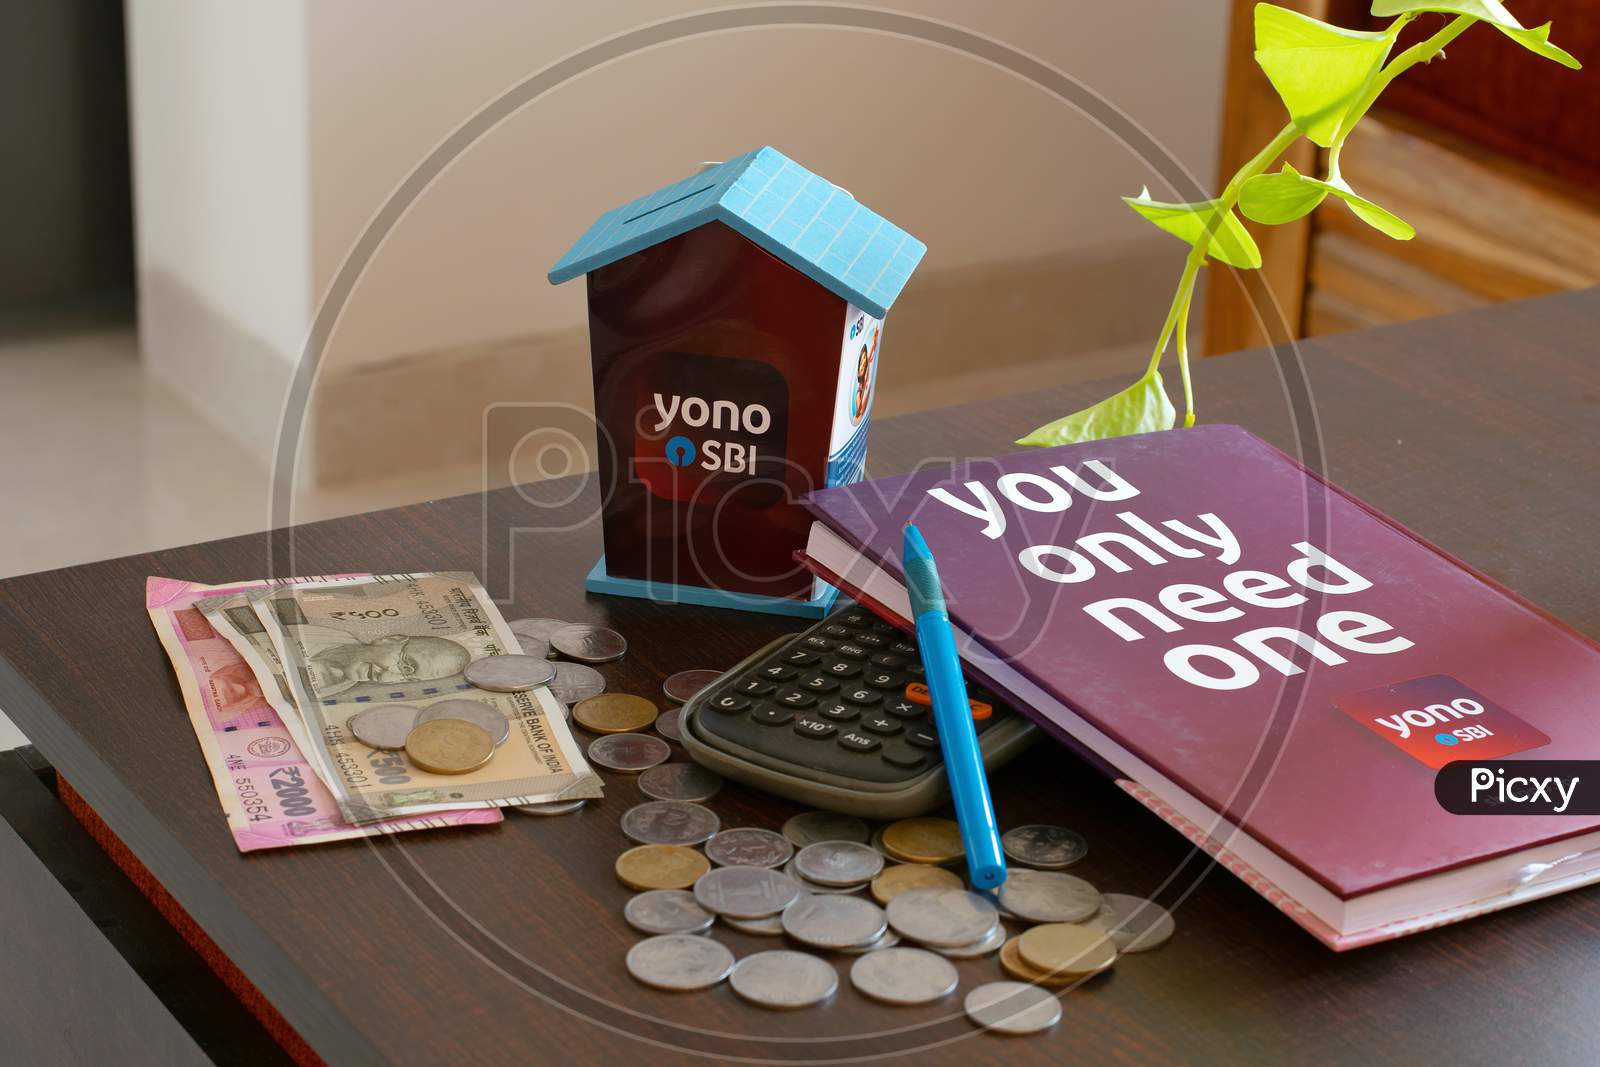 Palghar, India - 1 April 2021 A financial picture of State bank of India's YONO brand and its various banking products such as loans, savings account, digital banking, fixed deposits, debit-credit etc